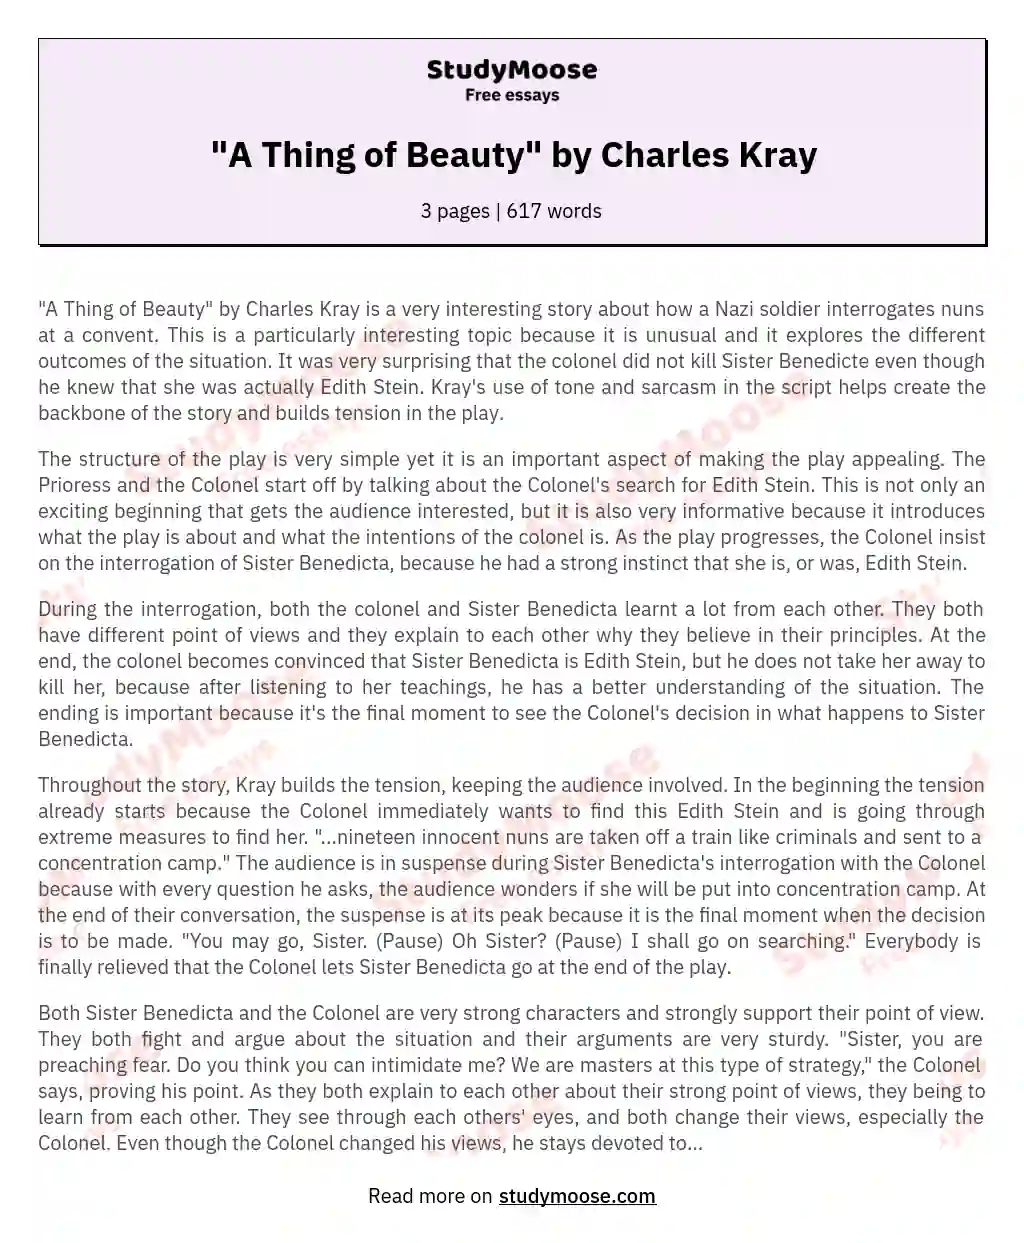 "A Thing of Beauty" by Charles Kray